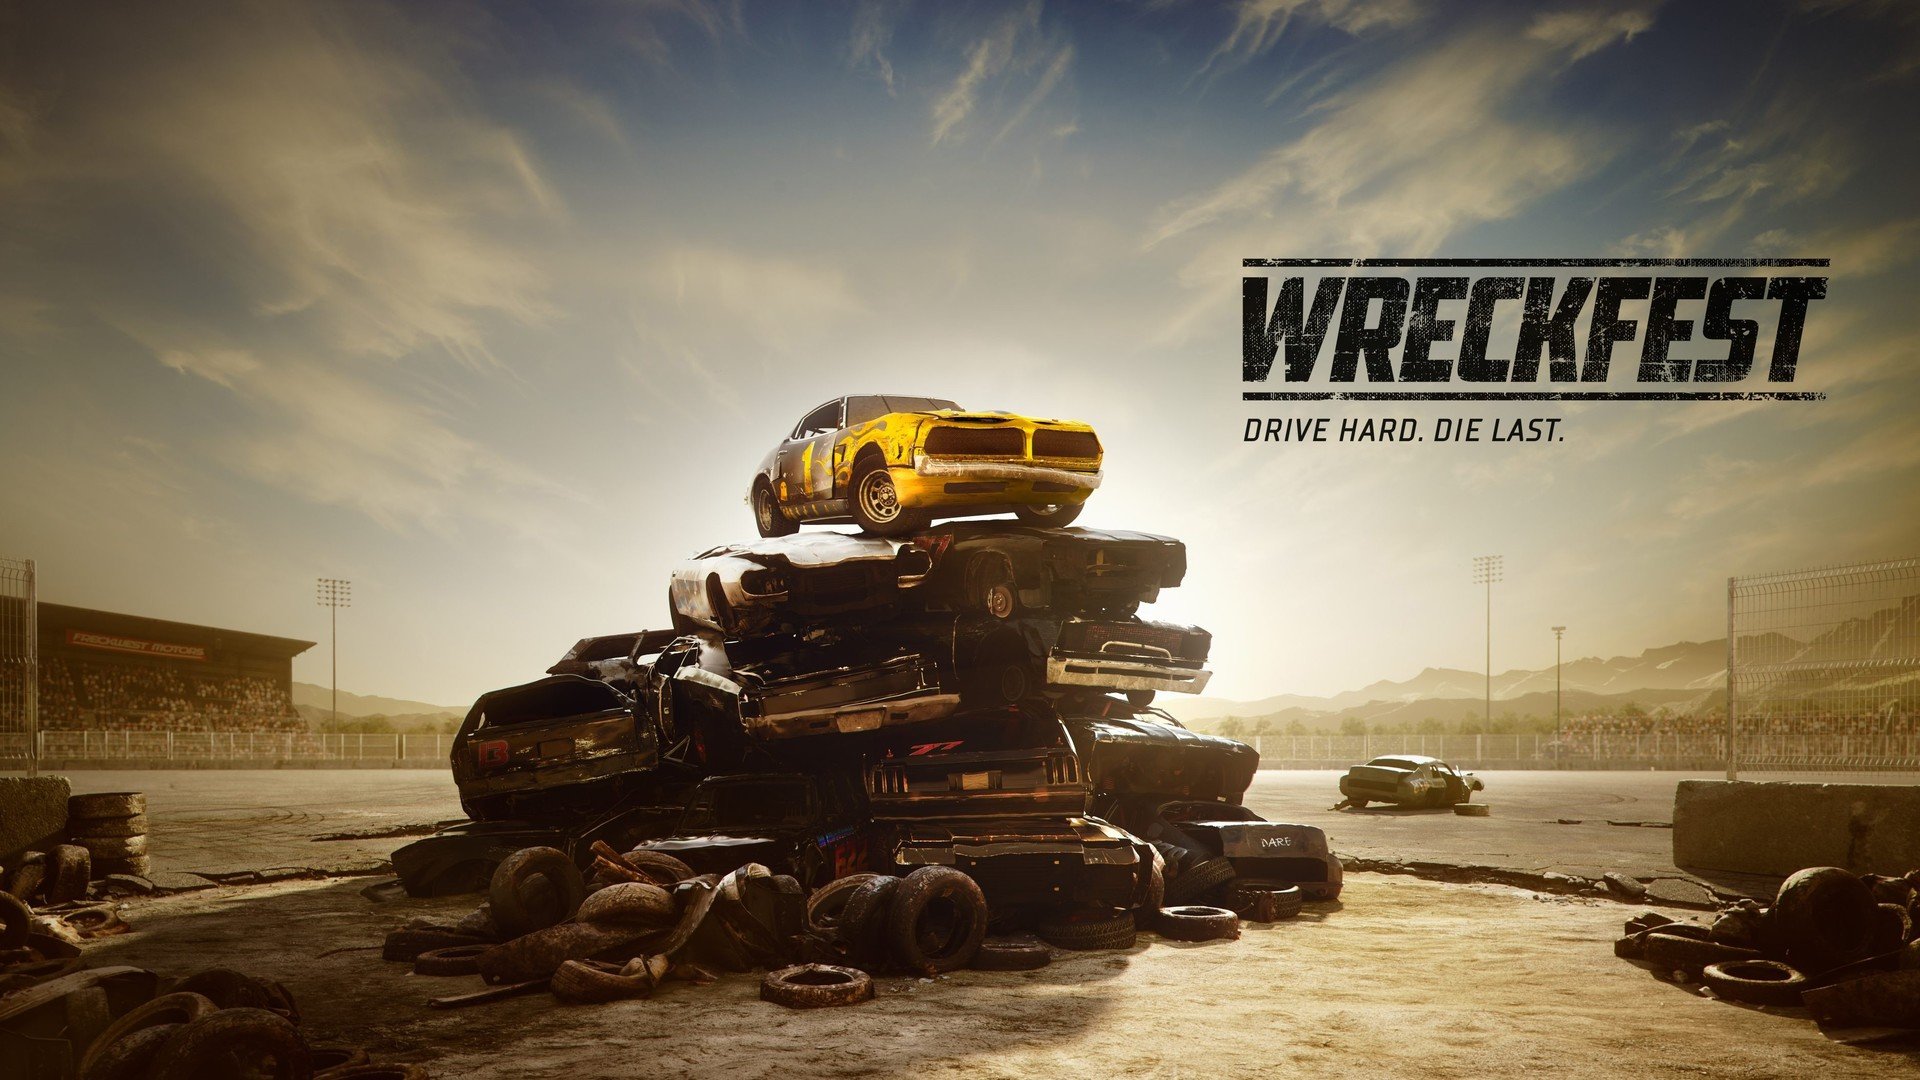 Wrext-Gen: Wreckfest Coming To Playstation 5 On June 1st 2021!